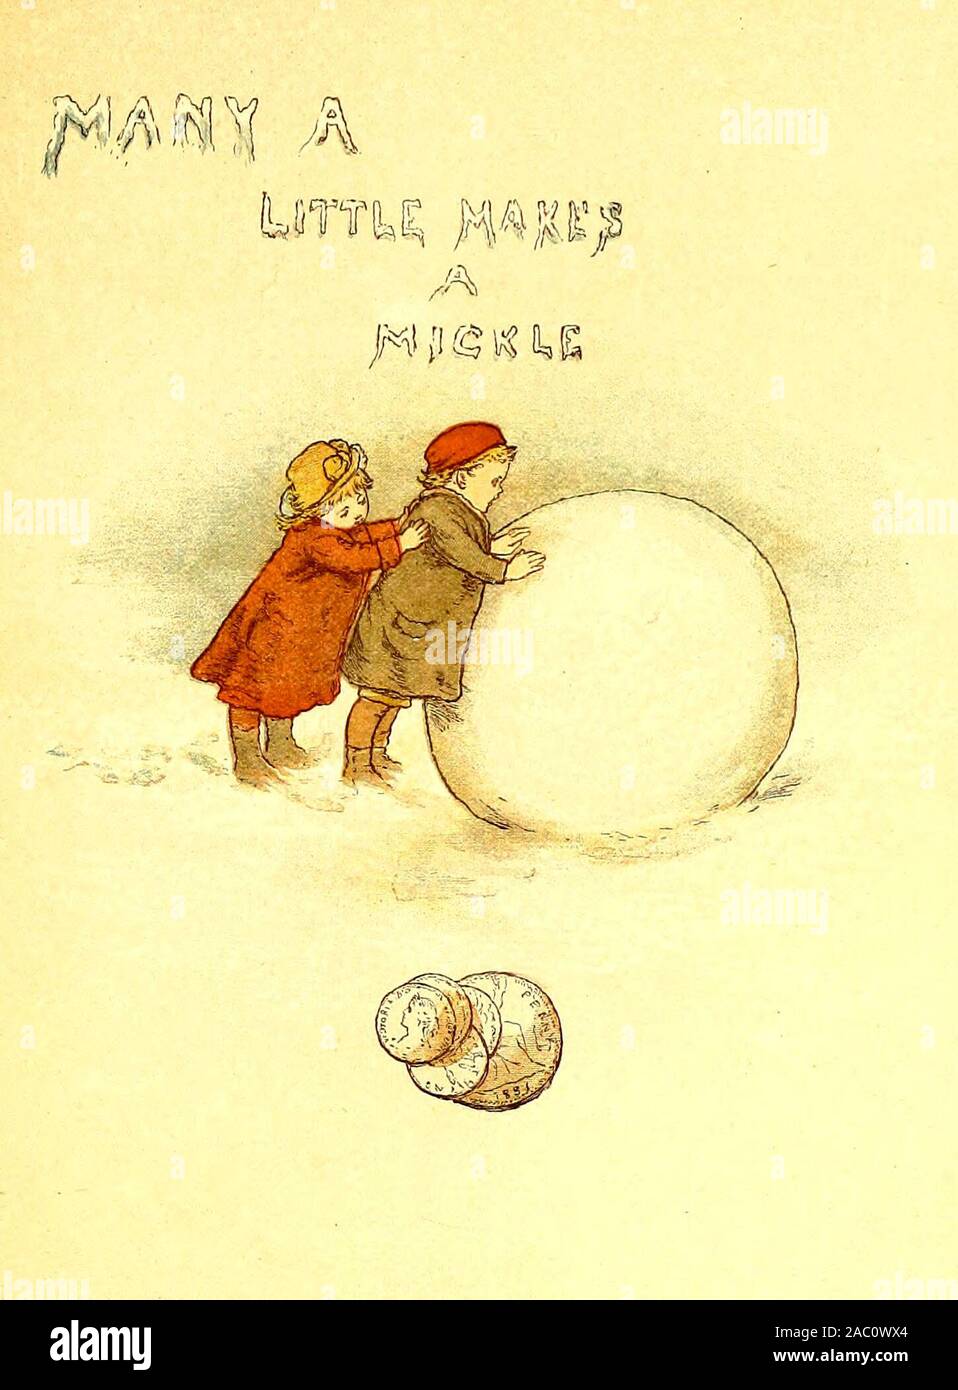 Many a little makes a mickle - A vintage illustration of an old proverb Stock Photo